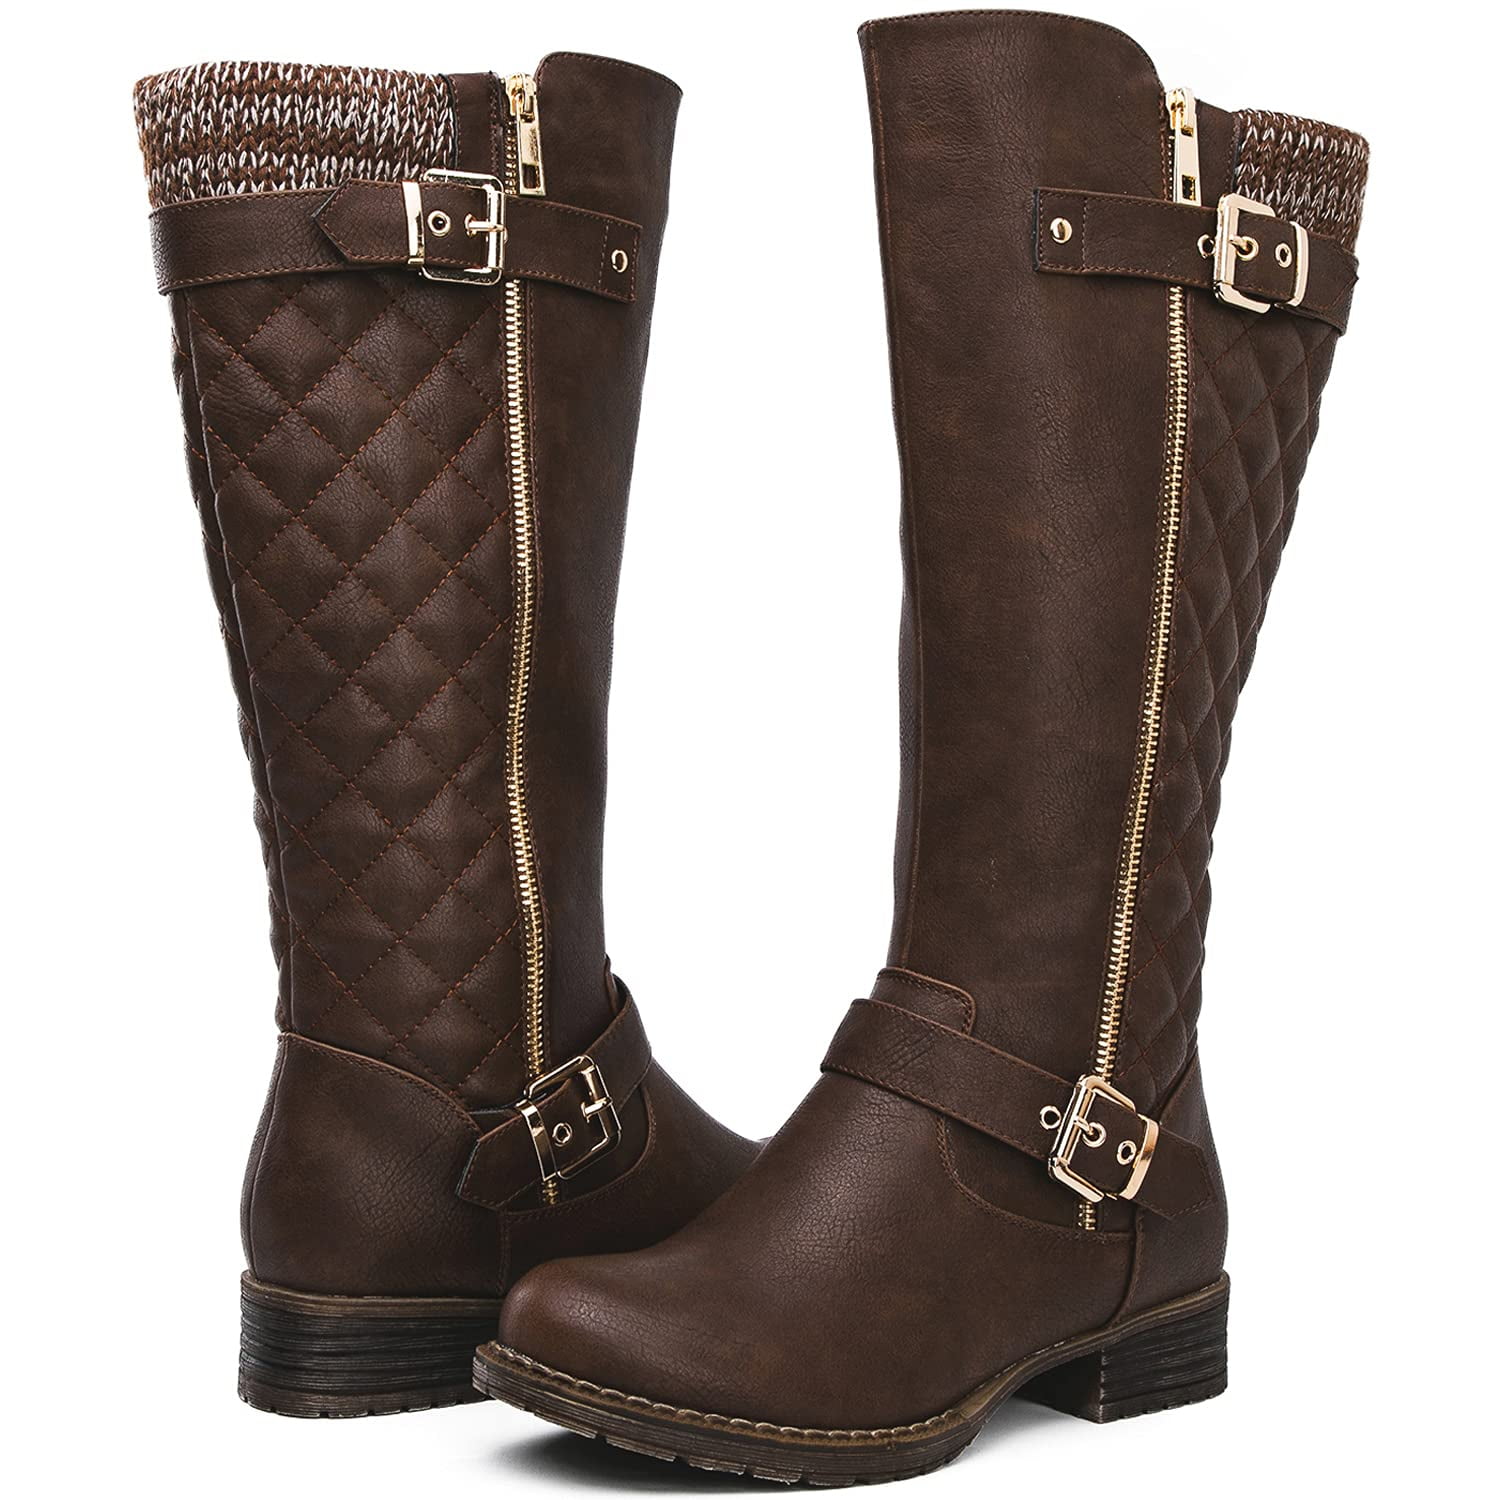 GLOBALWIN Women's Brown Quilted Knee-High Fall Winter Fashion Riding ...